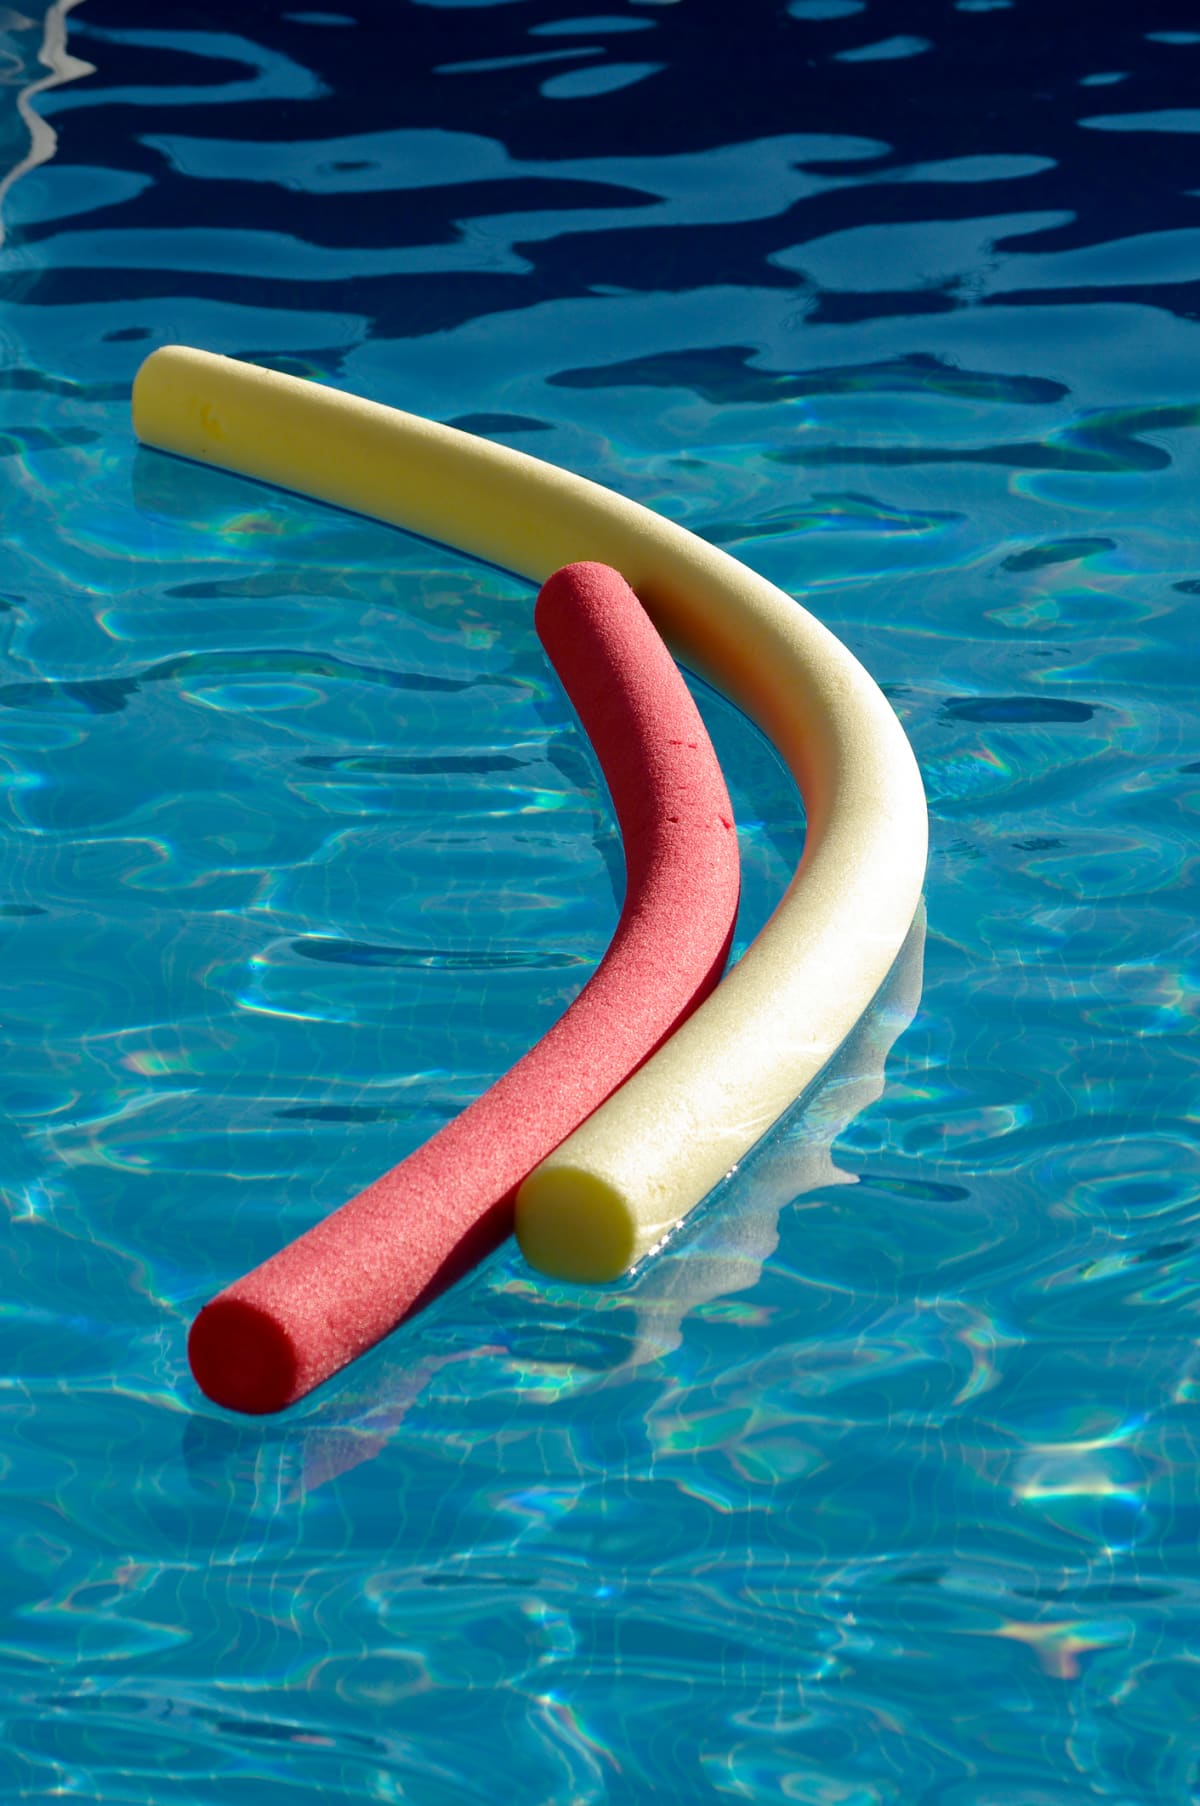 Pool noodles floating in the swimming pool